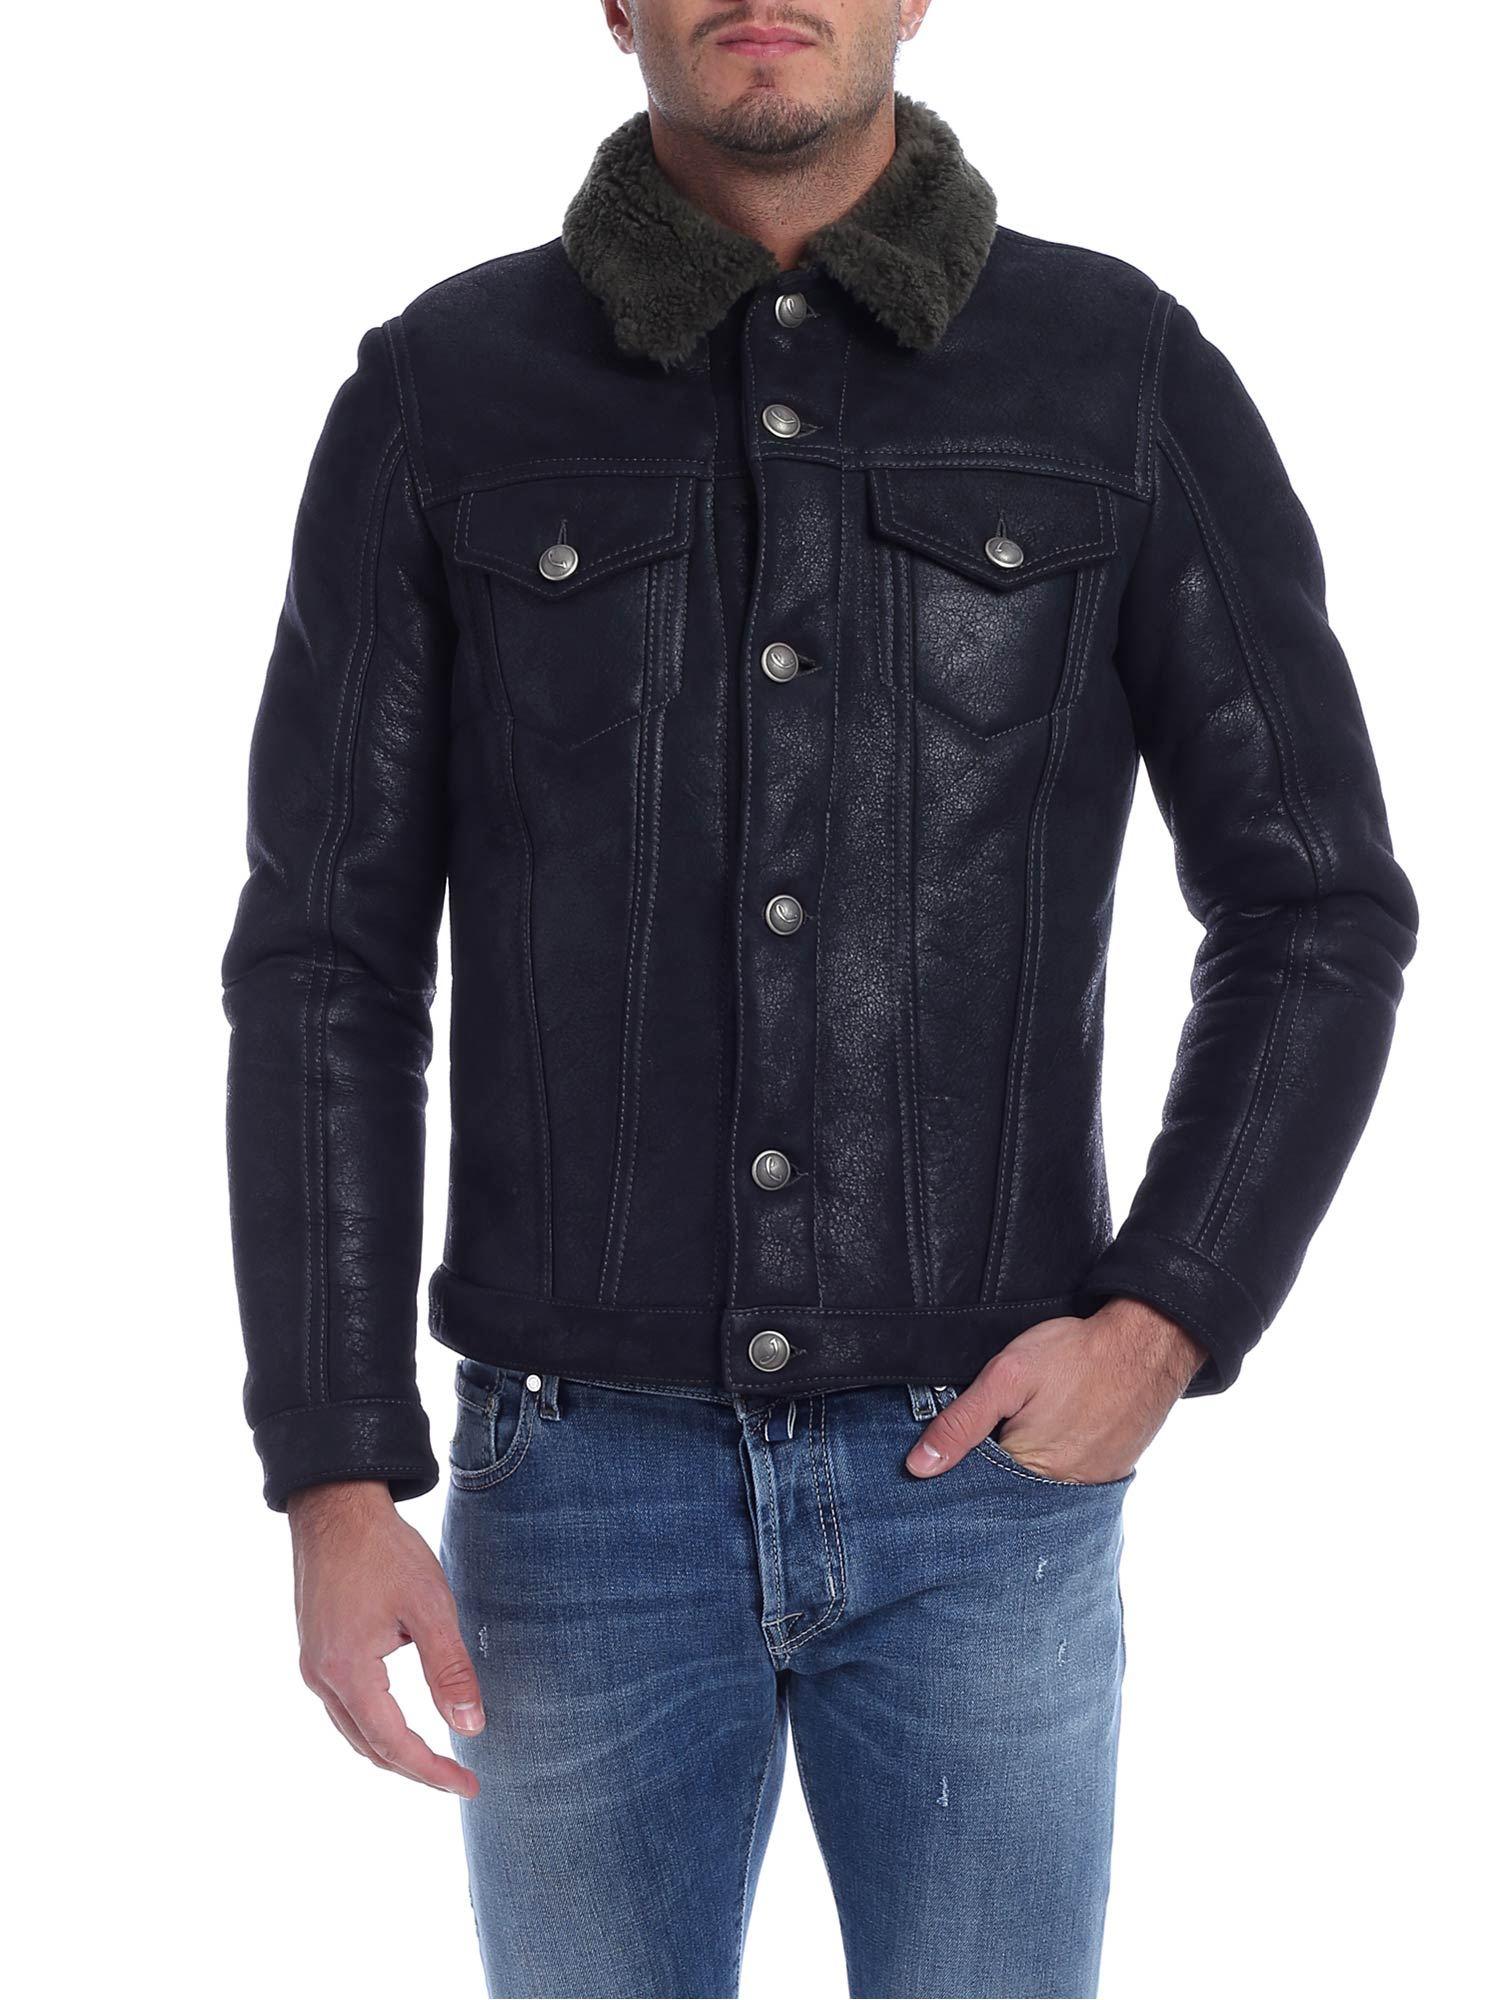 Jacob Cohen Leather Green Collar Jacket In Black for Men - Lyst